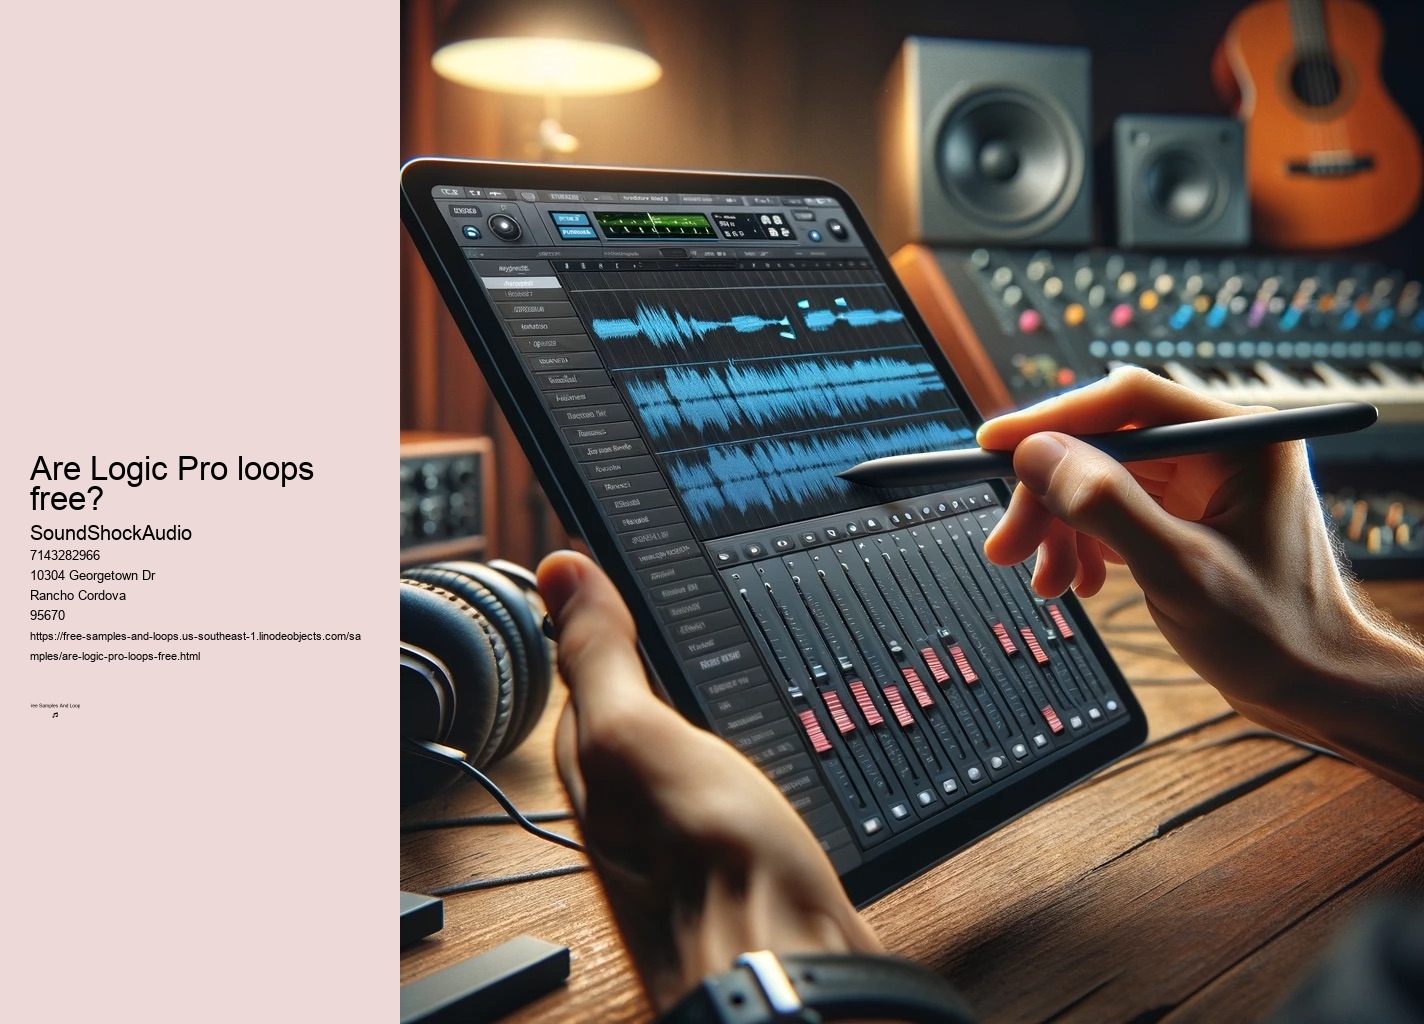 Are Logic Pro loops free?